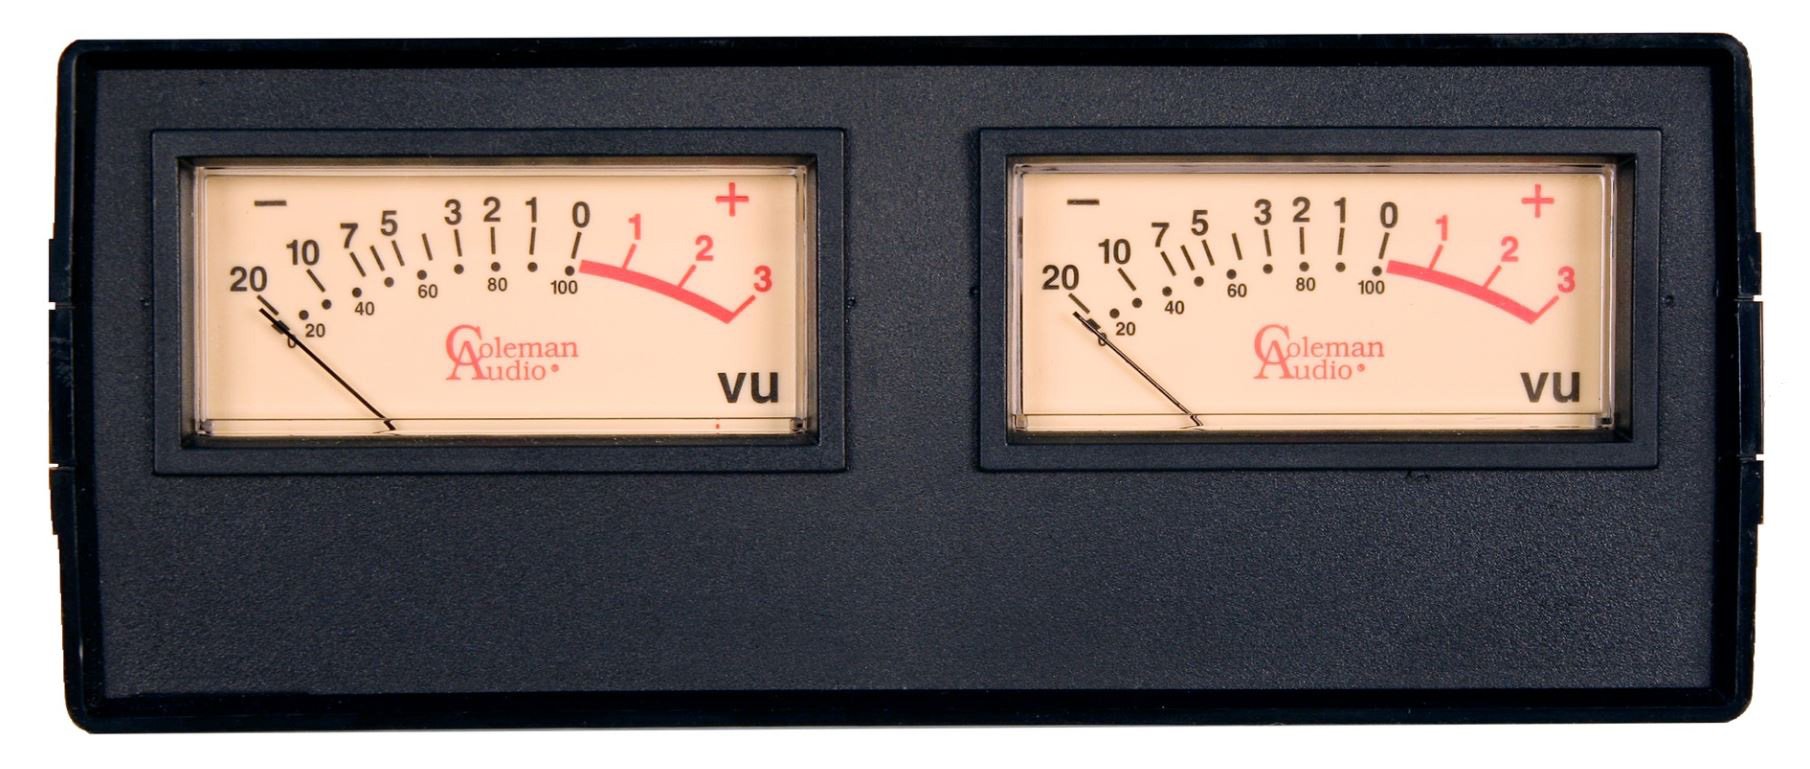 NEW VU Meter Bridge Unit for Studer A807, A810, A67, B67, C37 or any Other  Reel To Reel Tape Recorder - Reel to Reel World